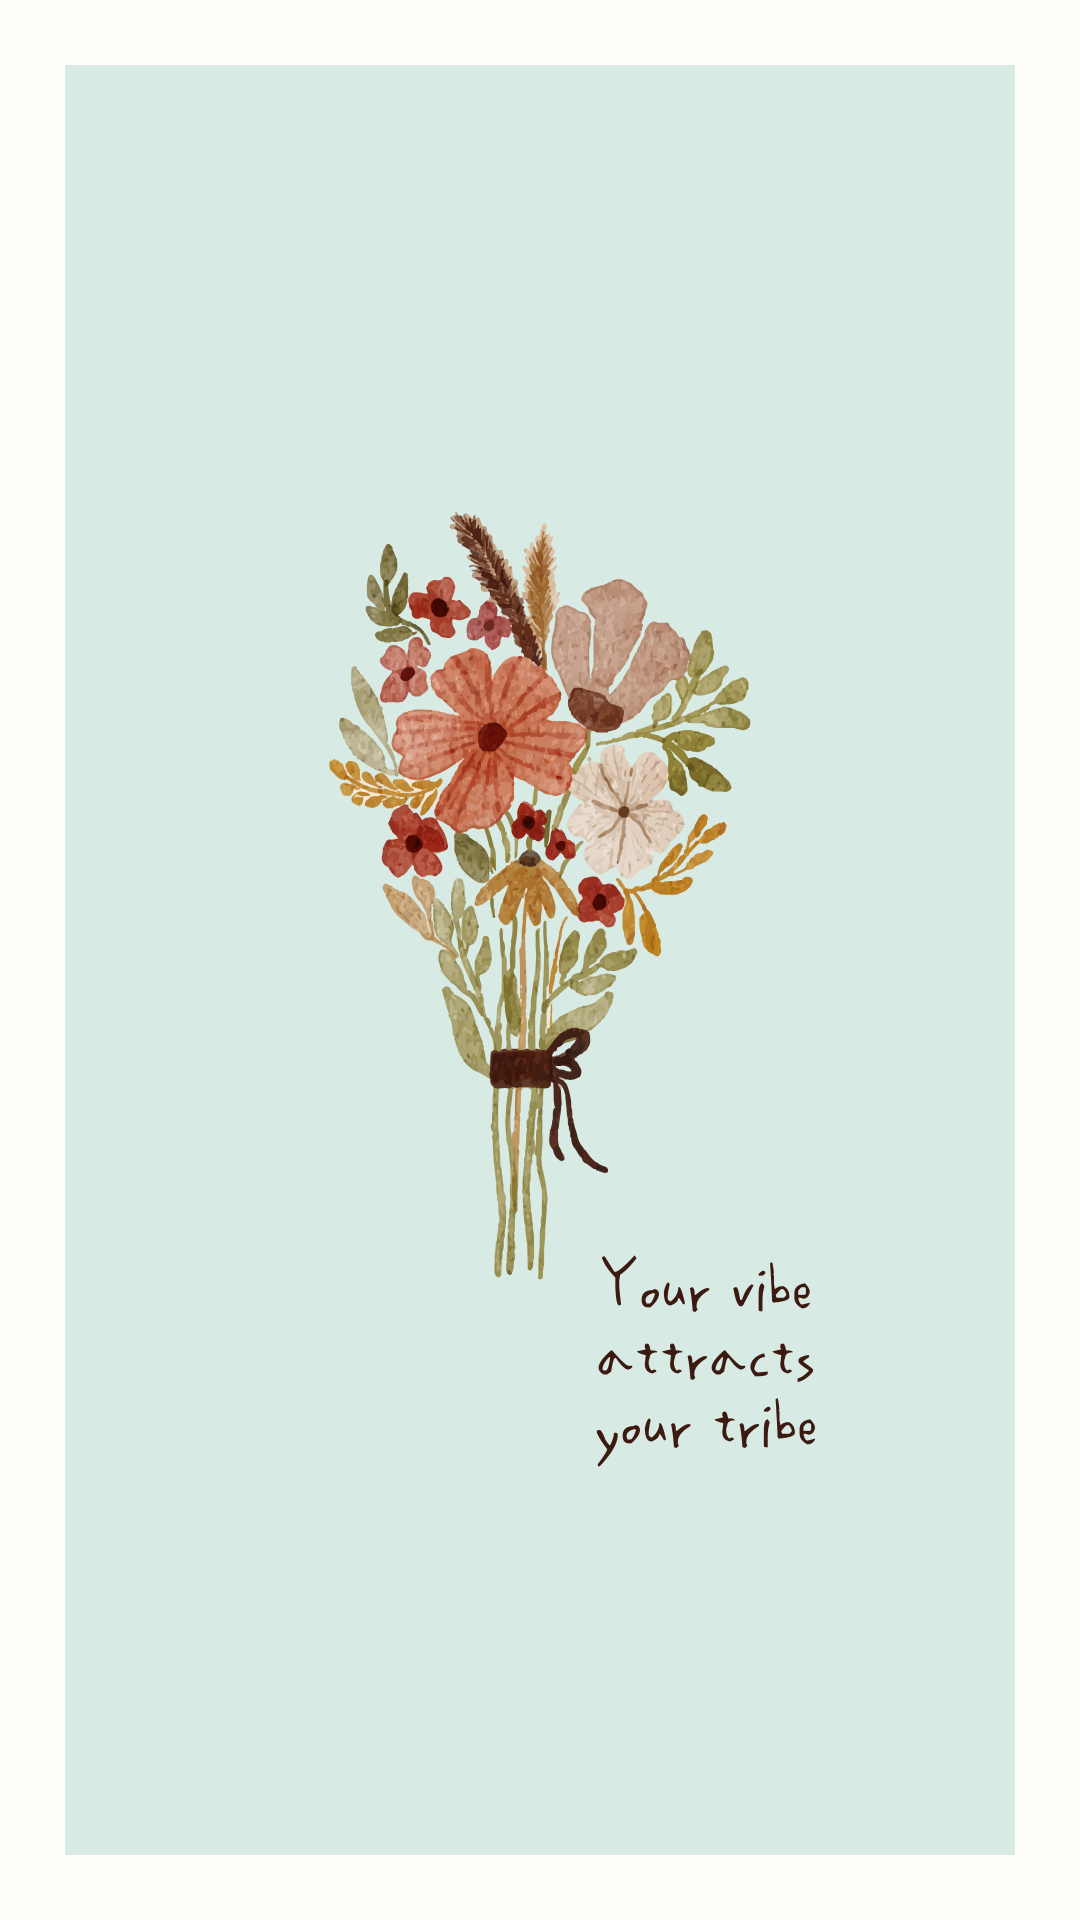 32 Short Sparks of Positivity Quotes : Your vibe attracts your tribe